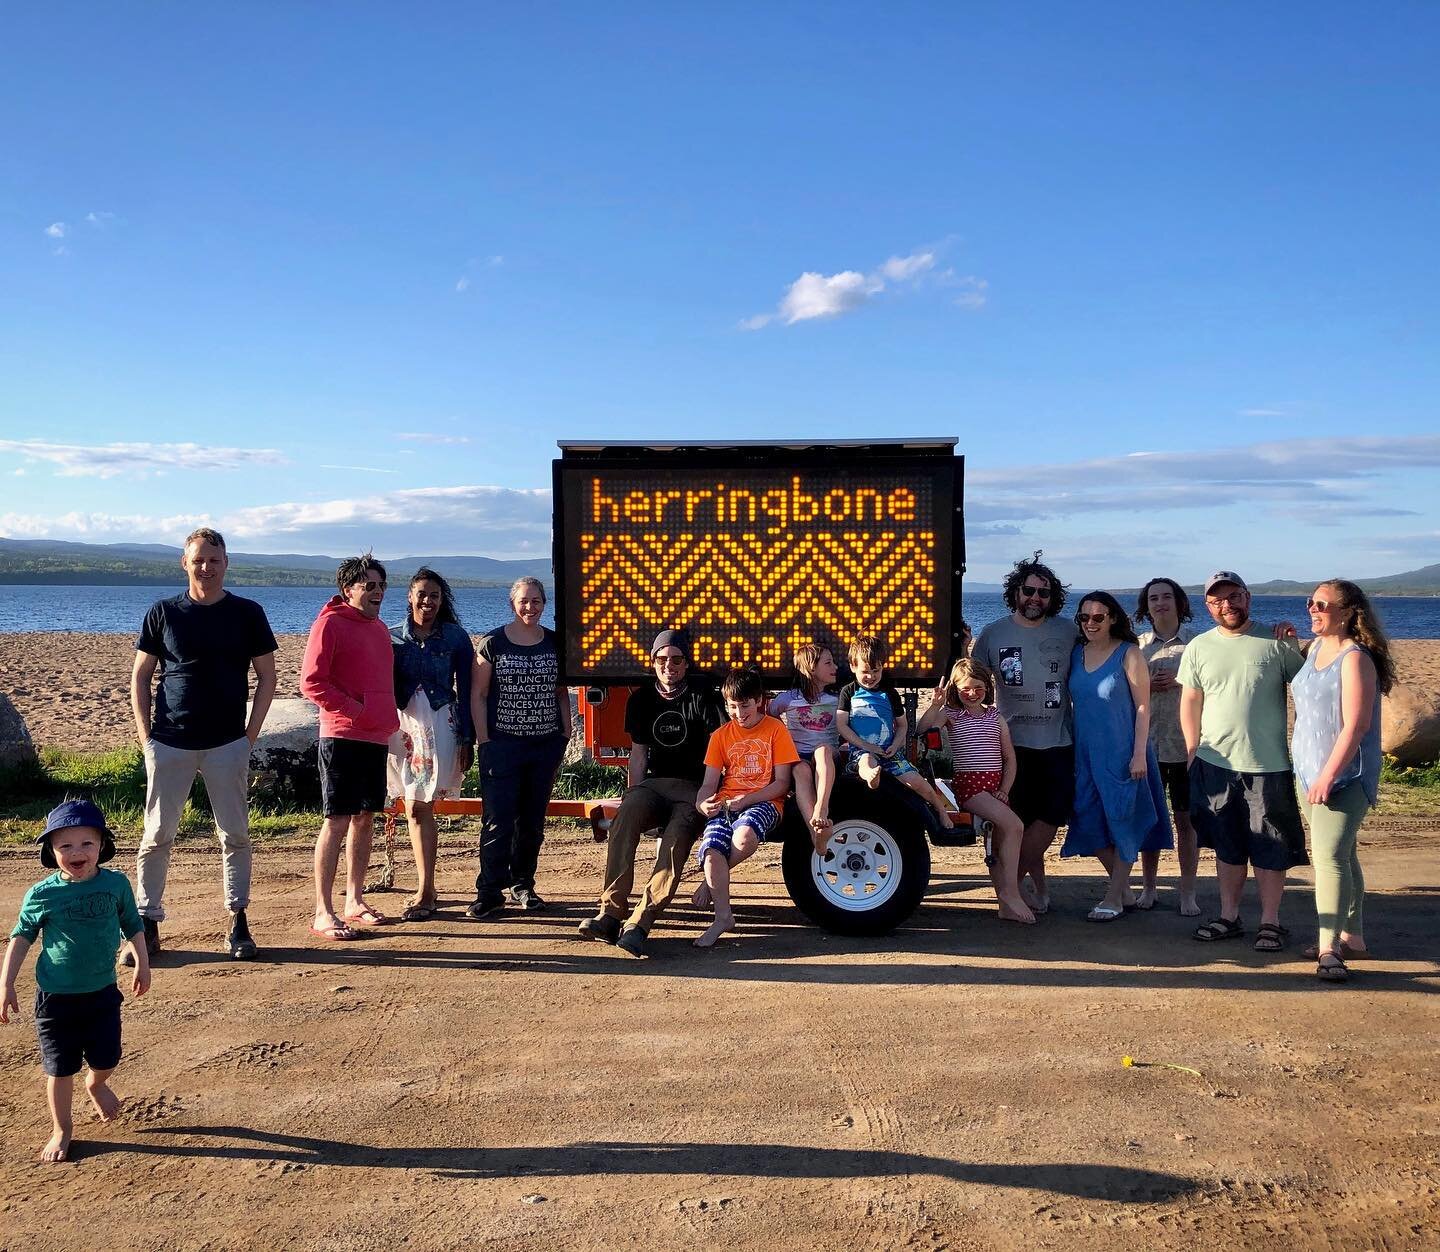 We had our first public launch of a Cloud Factory event yesterday at Pasadena Beach with our COVID &lsquo;tight 20&rsquo;. So wonderful to see the Word on the Street project up and running and out in the community. @anie_textiles work pictured here. 